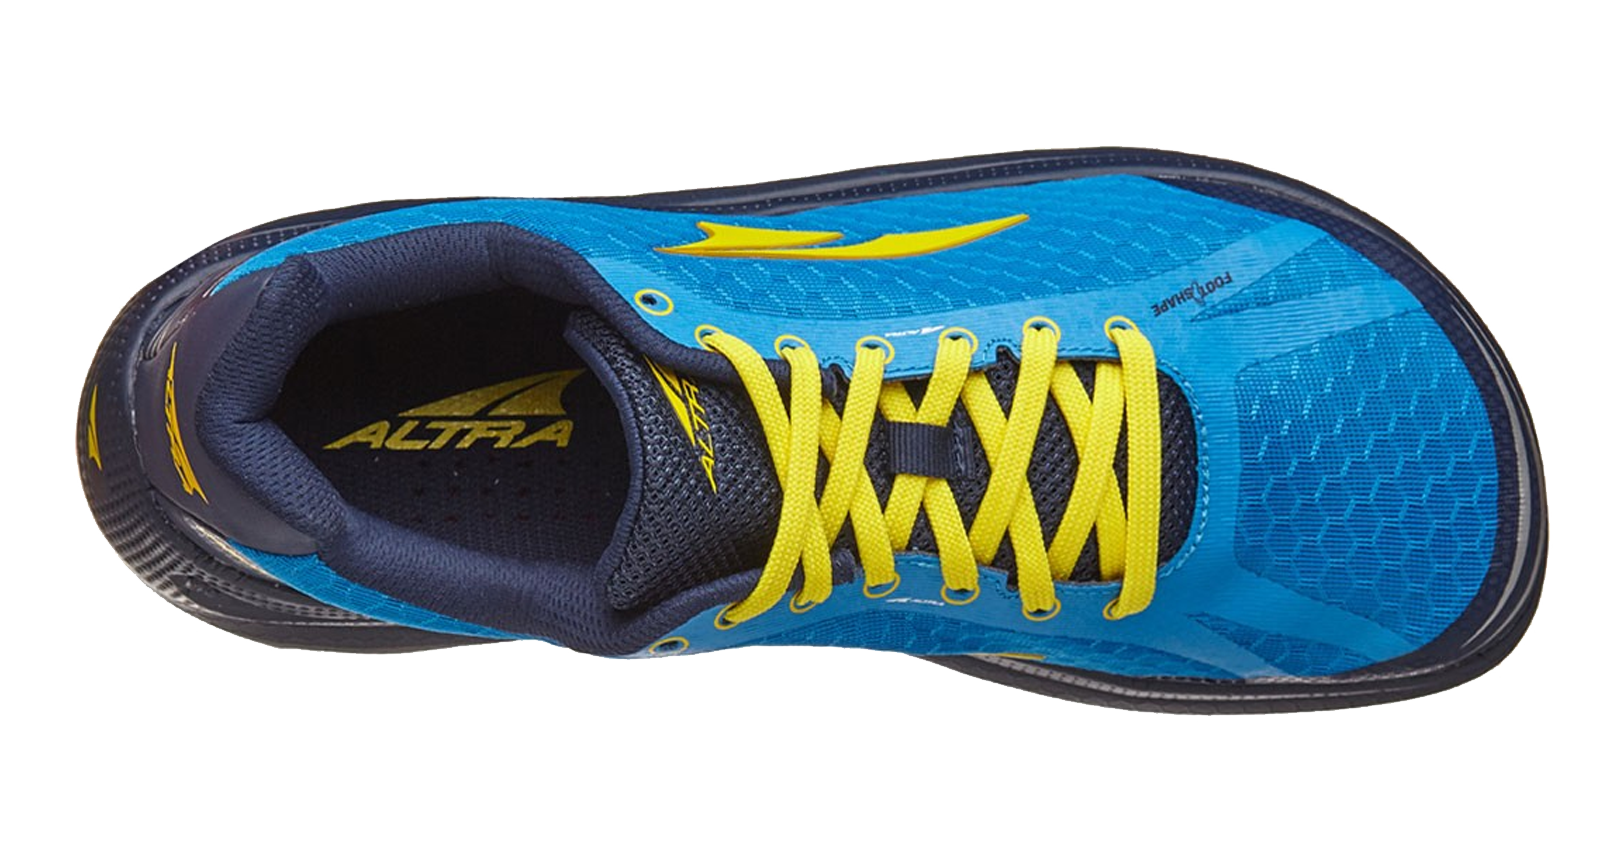 Altra Paradigm 2.0 Performance Review - Believe in the Run